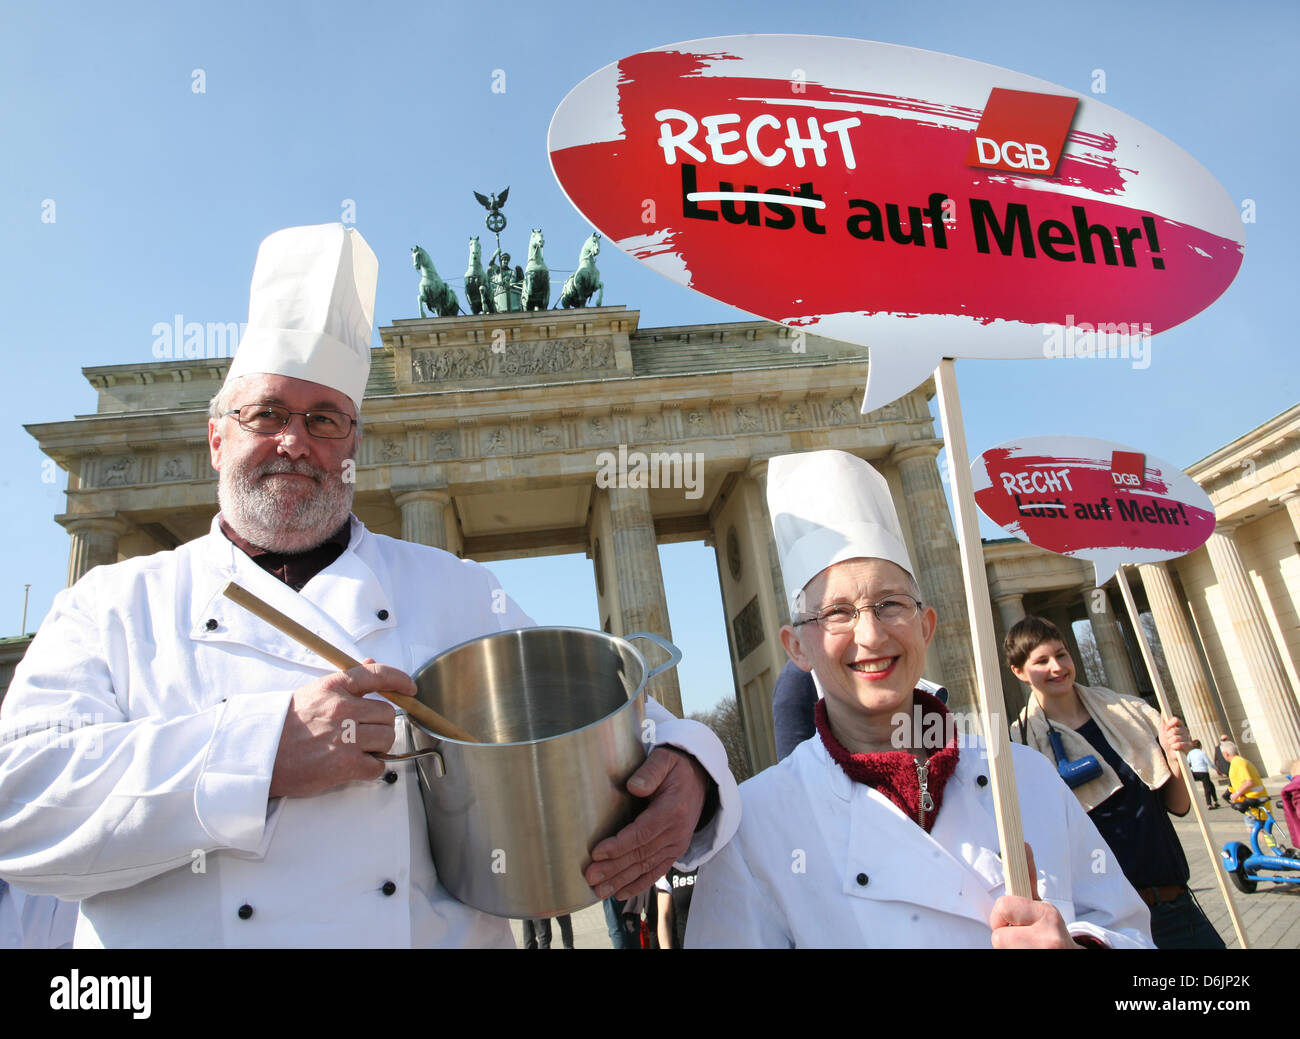 Two protesters dressed as chefs hold up a sign which reads 'Recht auf Mehr!' (Rights to more!) during the 'Equal Pay Day' rally in front of the Brandenburg Gate in Berlin, Germany, 23 March 2012. The rally took place on the occasion of the International Women's Day under the motto 'Recht statt billig - Entgeldgleichheit gesetzlich regeln' (Equal rights instead of cheap - for legal  Stock Photo